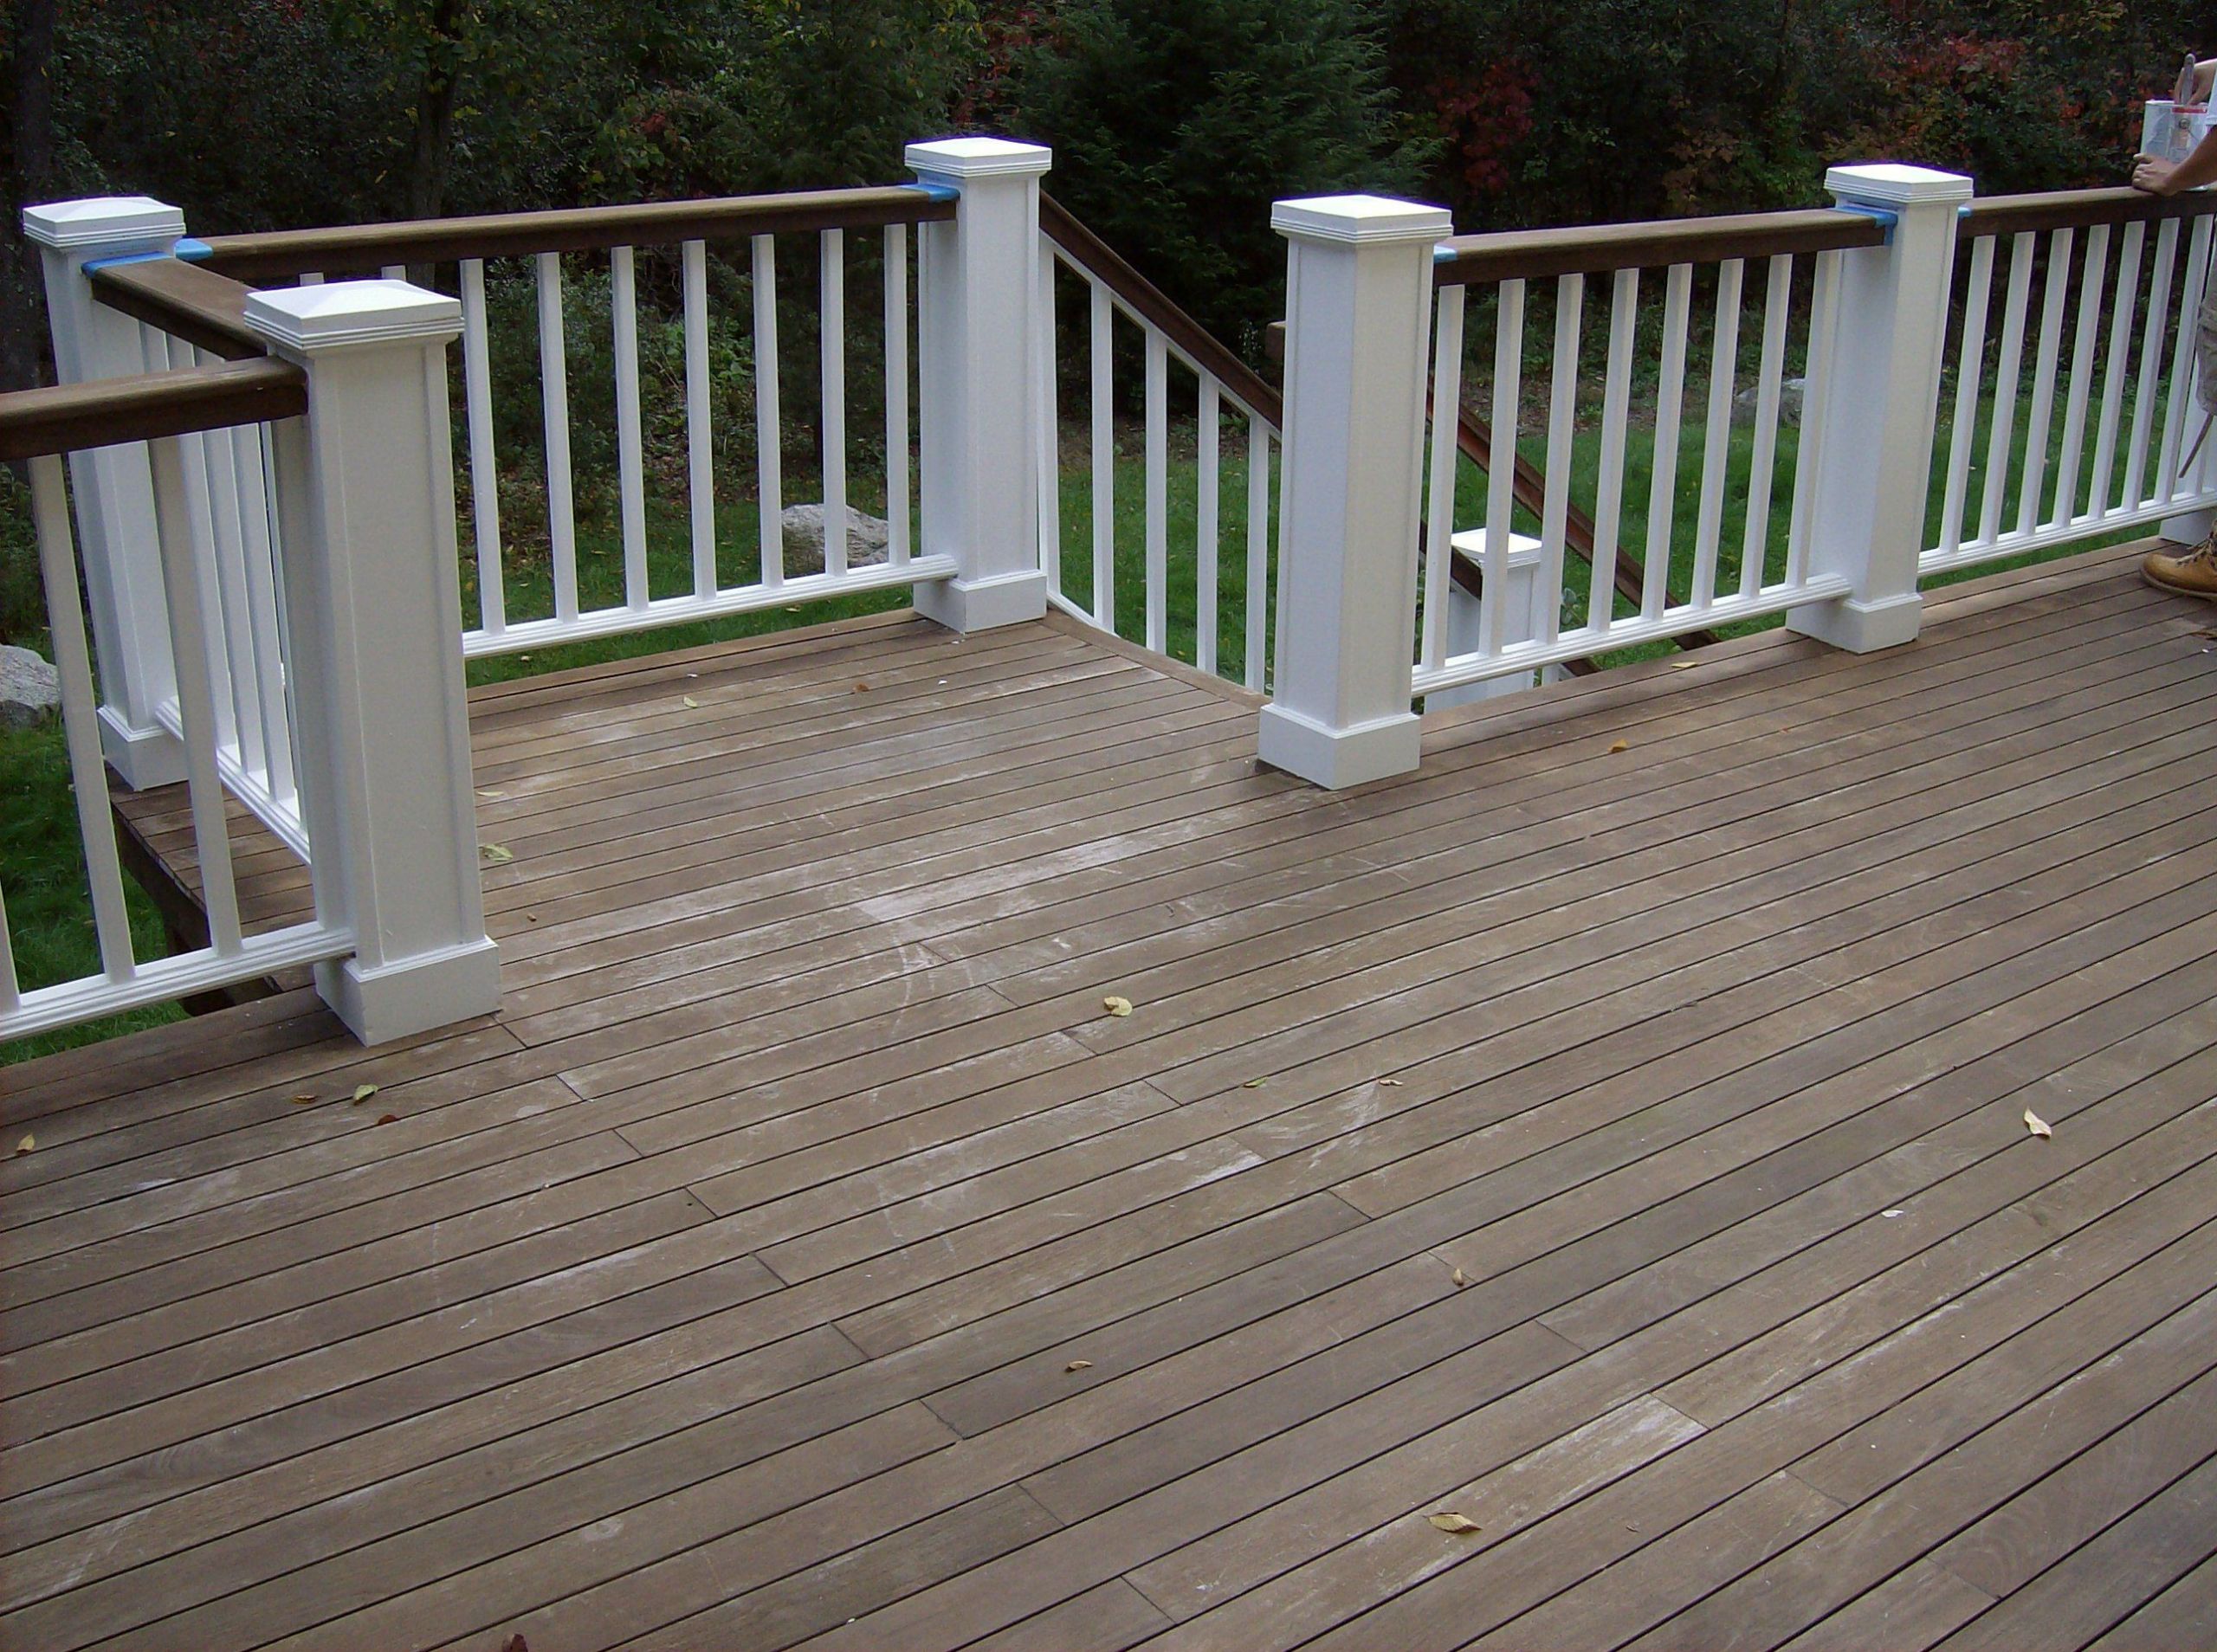 Painting Deck Railing
 love the idea of painting top railing slightly darker